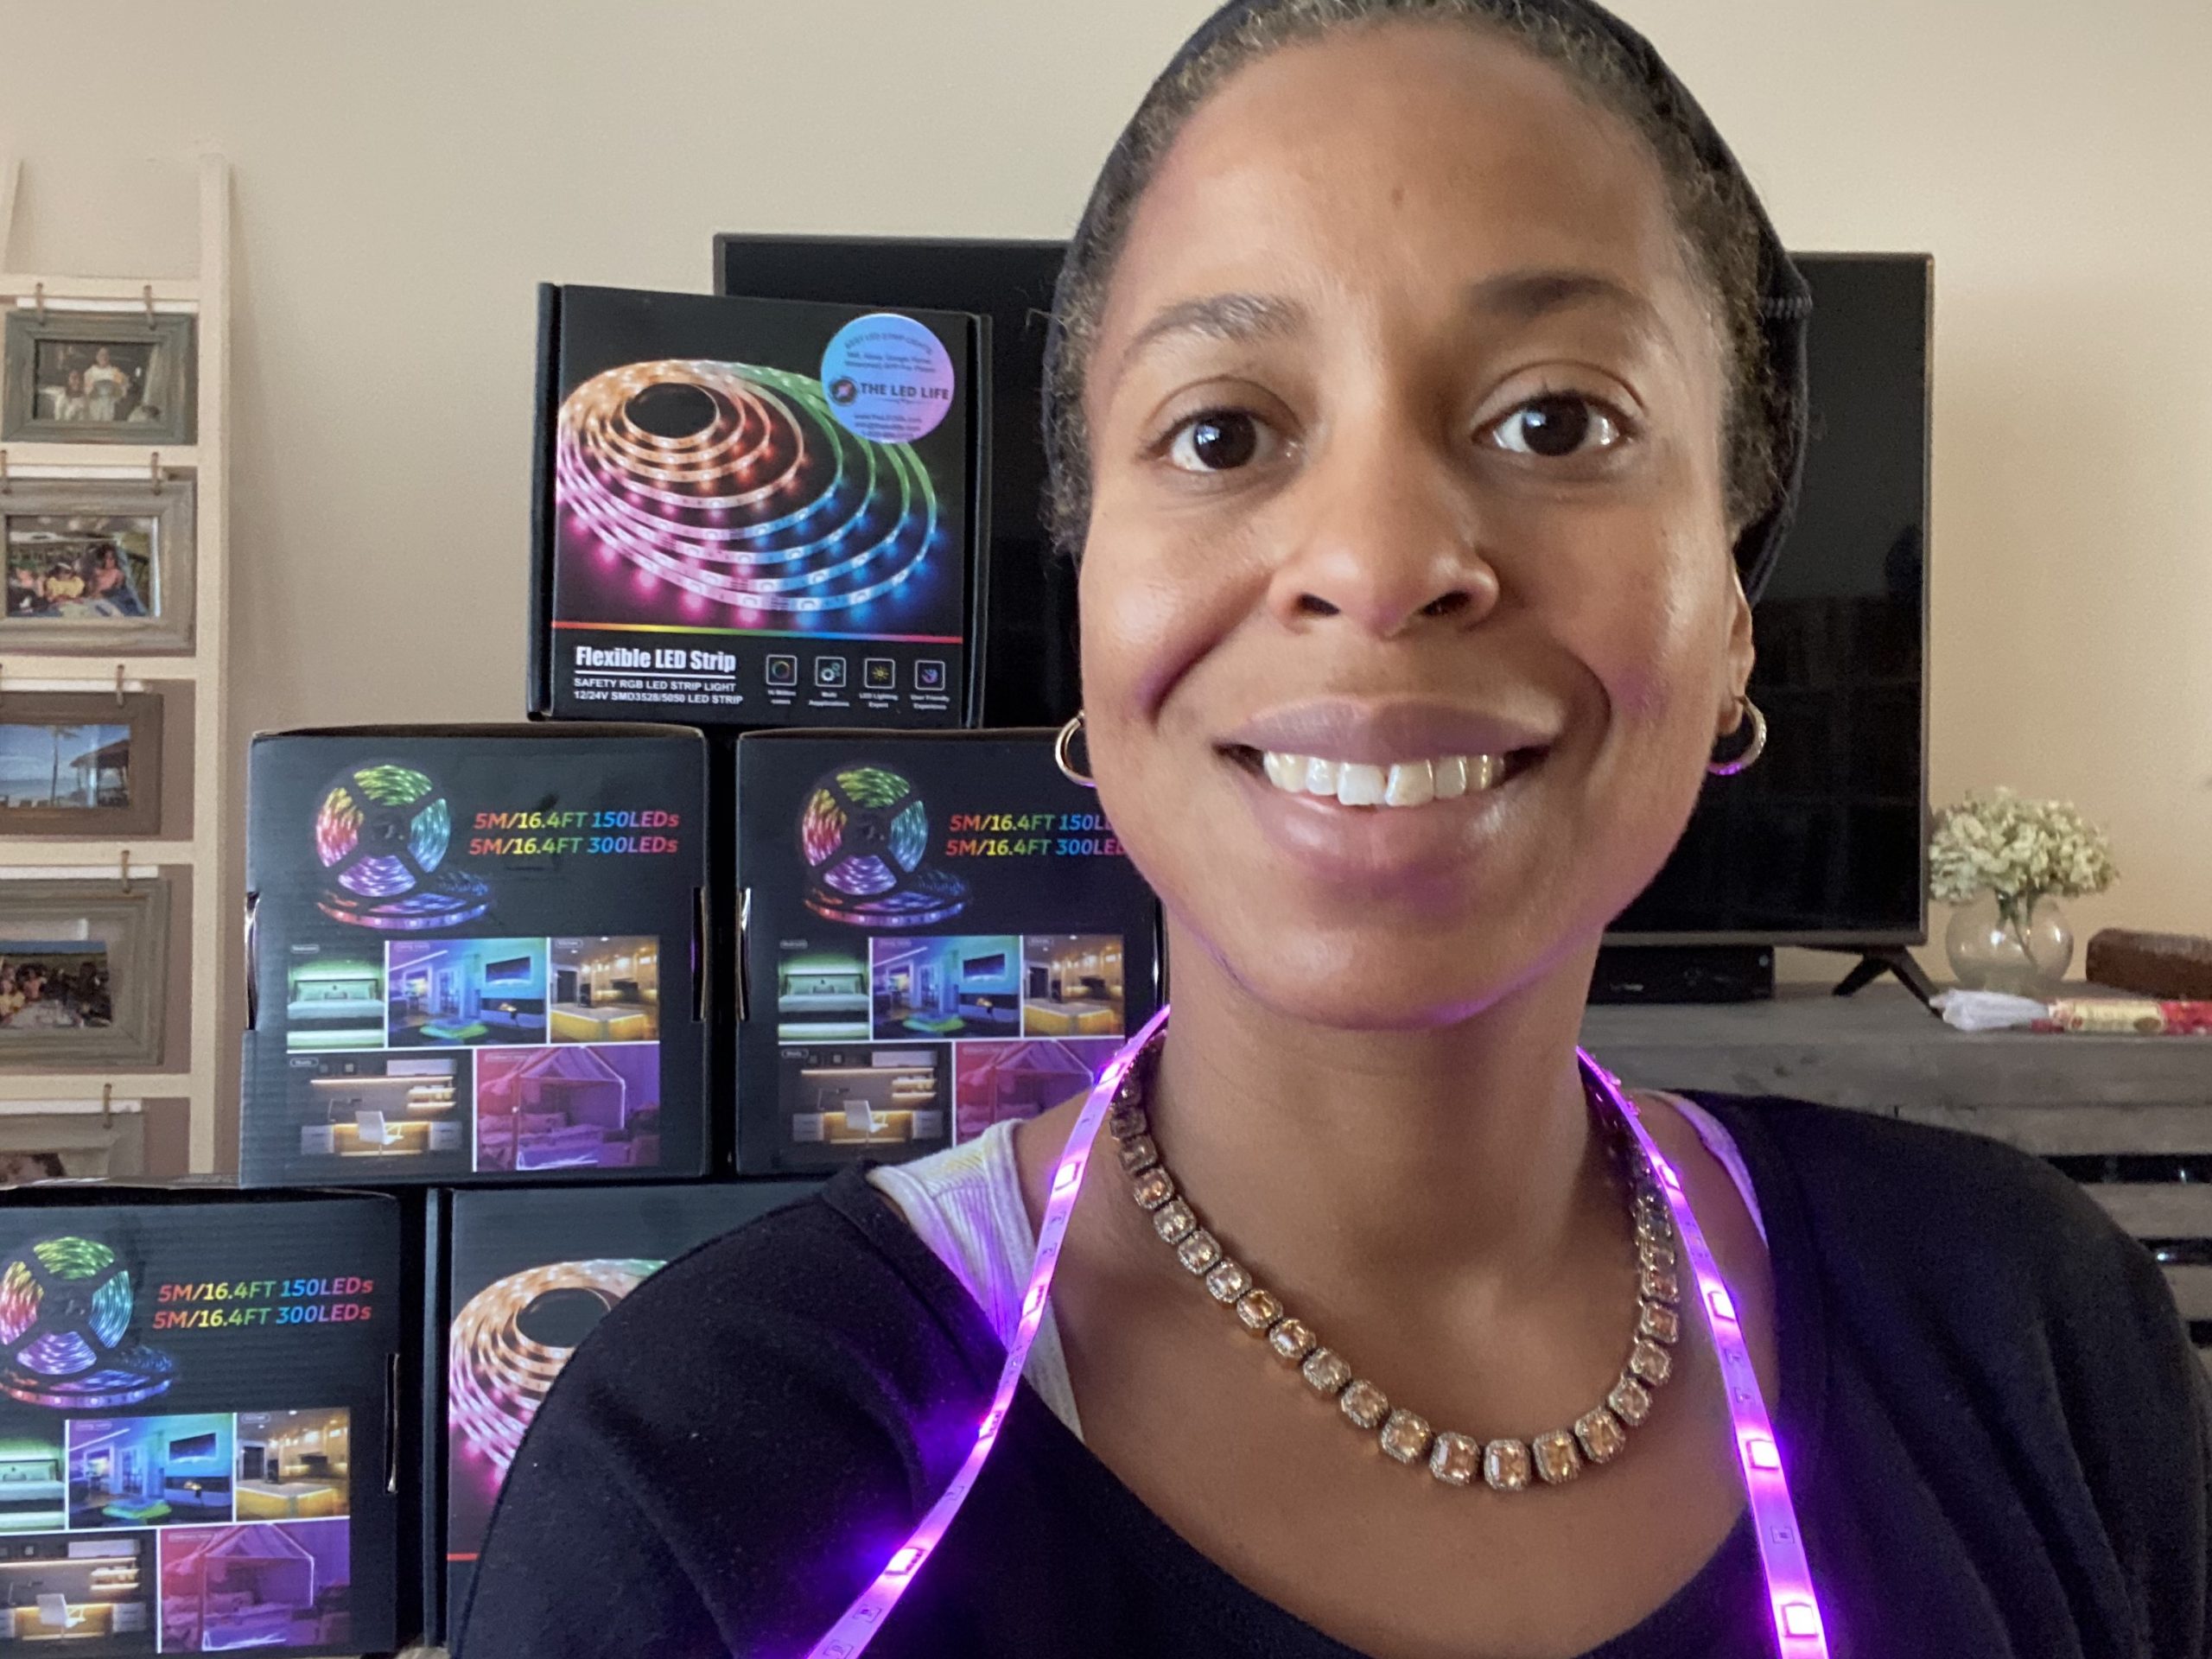 Person smiling with LED light strip over their shoulders and boxes of LED light strips in the background